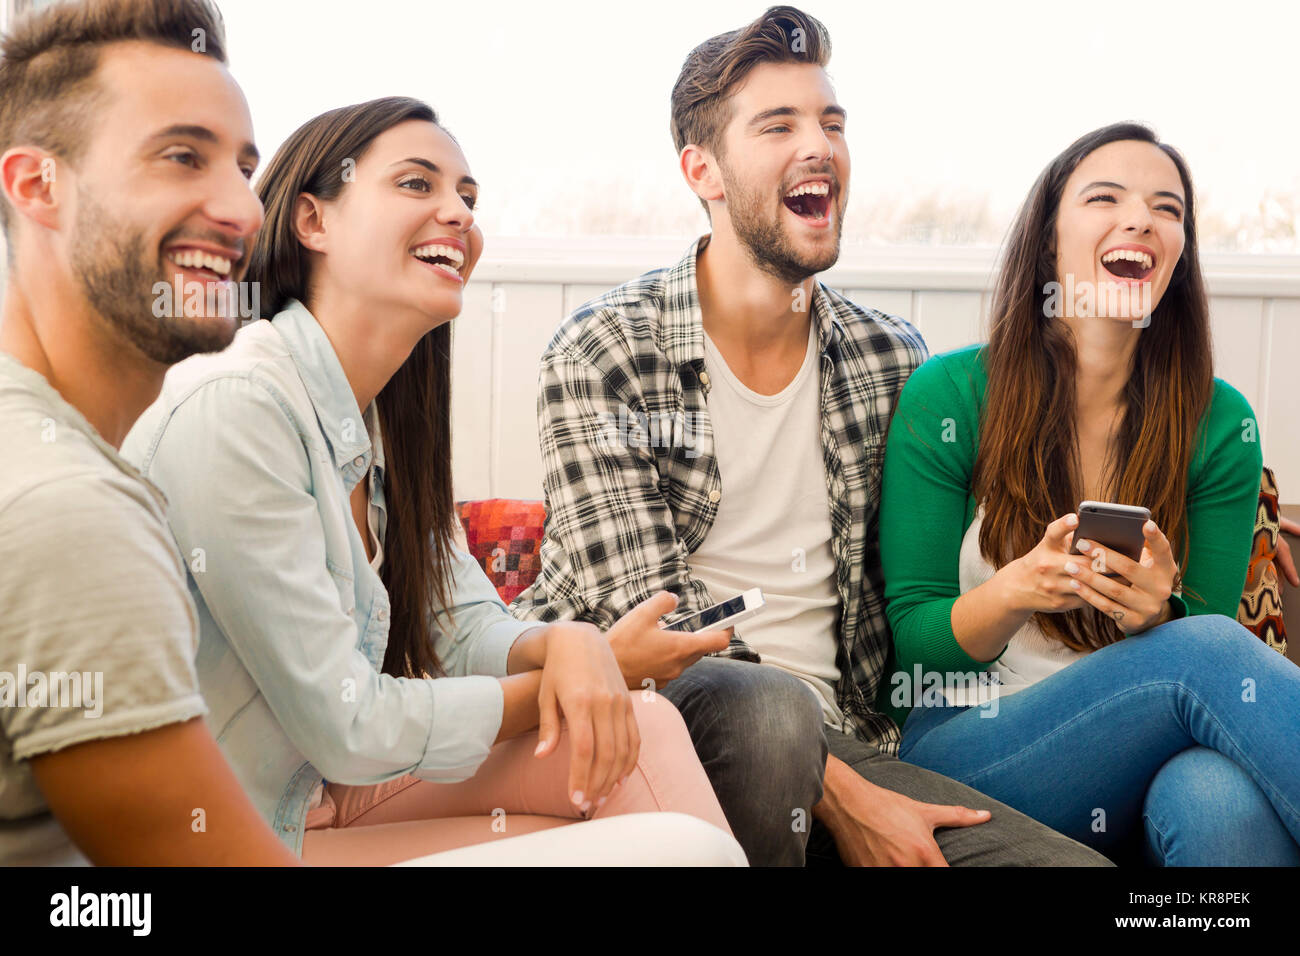 Meeting With Friends Stock Photo Alamy